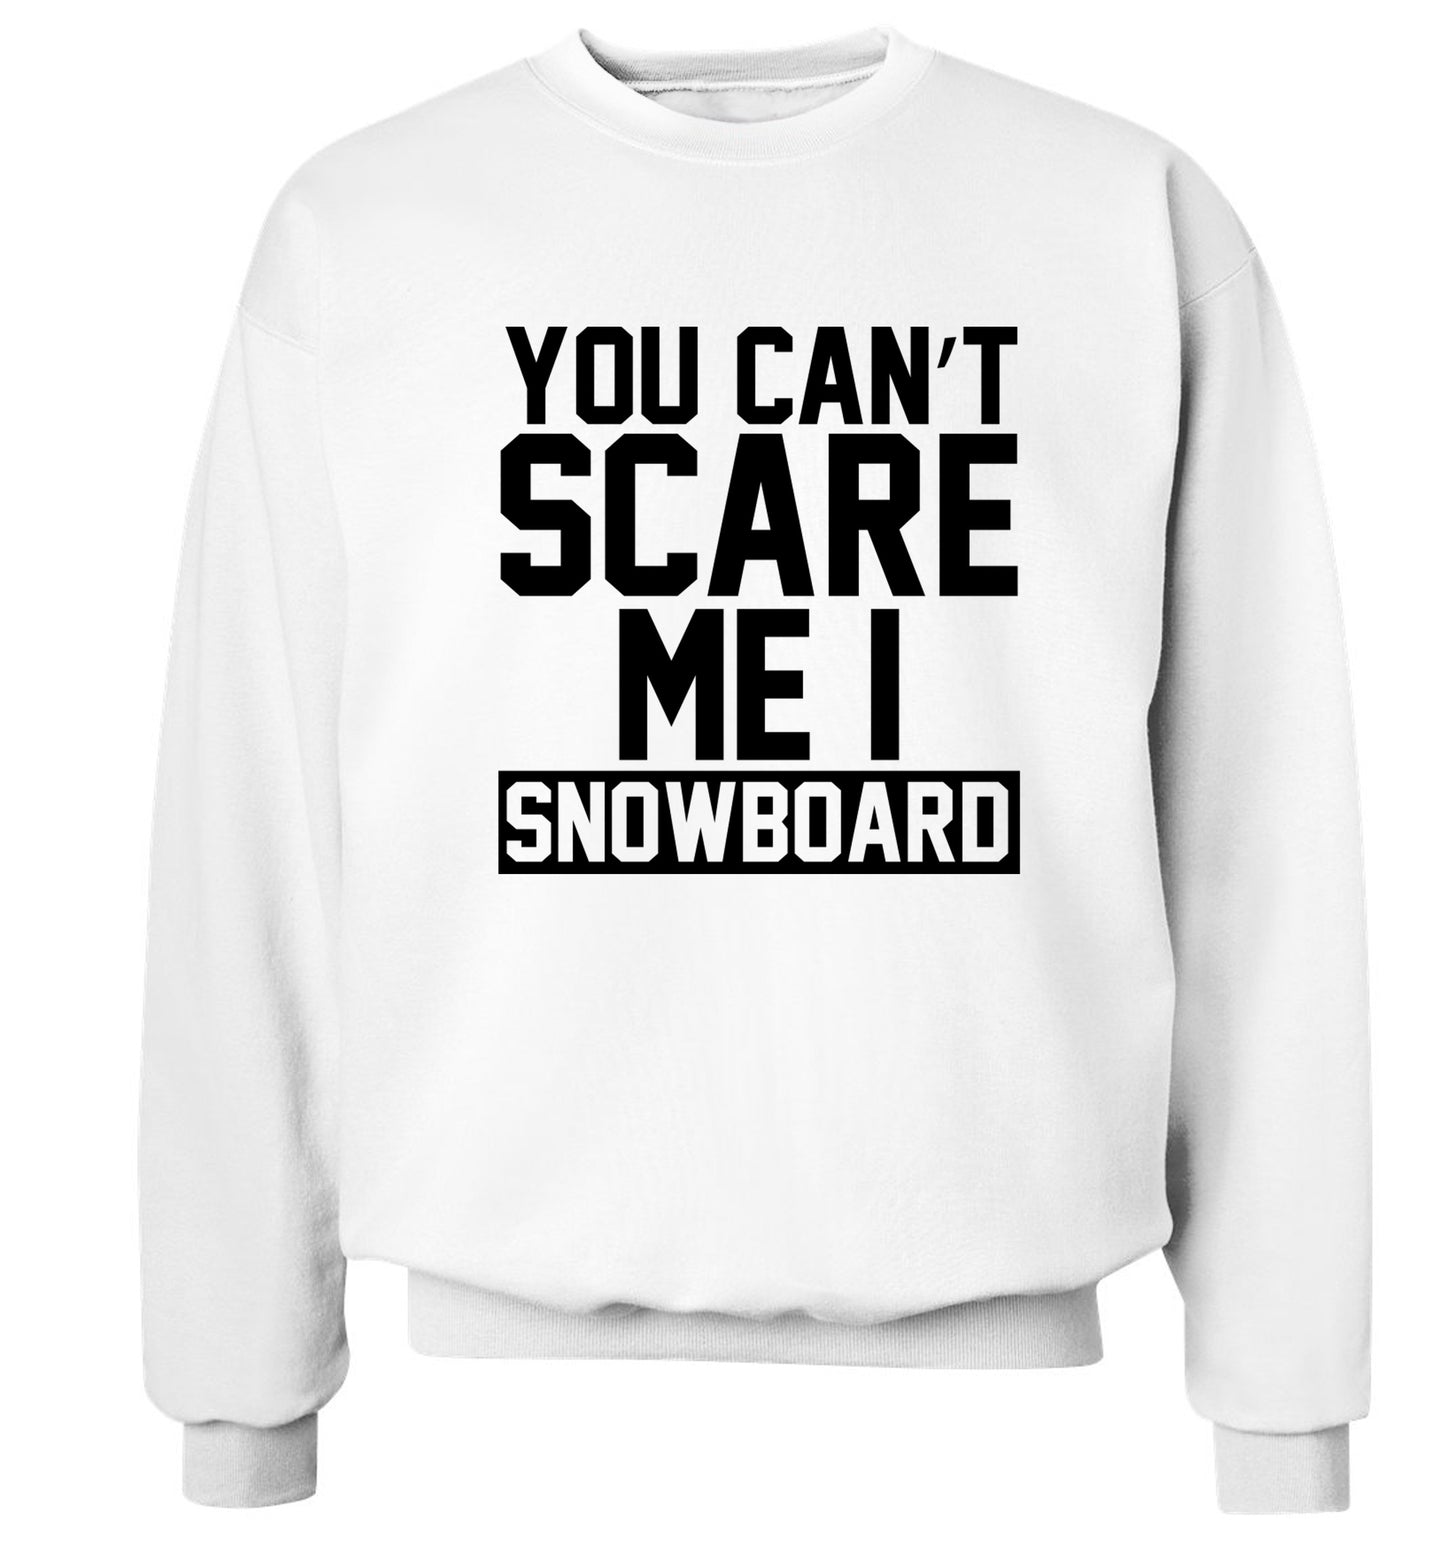 You can't scare me I snowboard Adult's unisex white Sweater 2XL